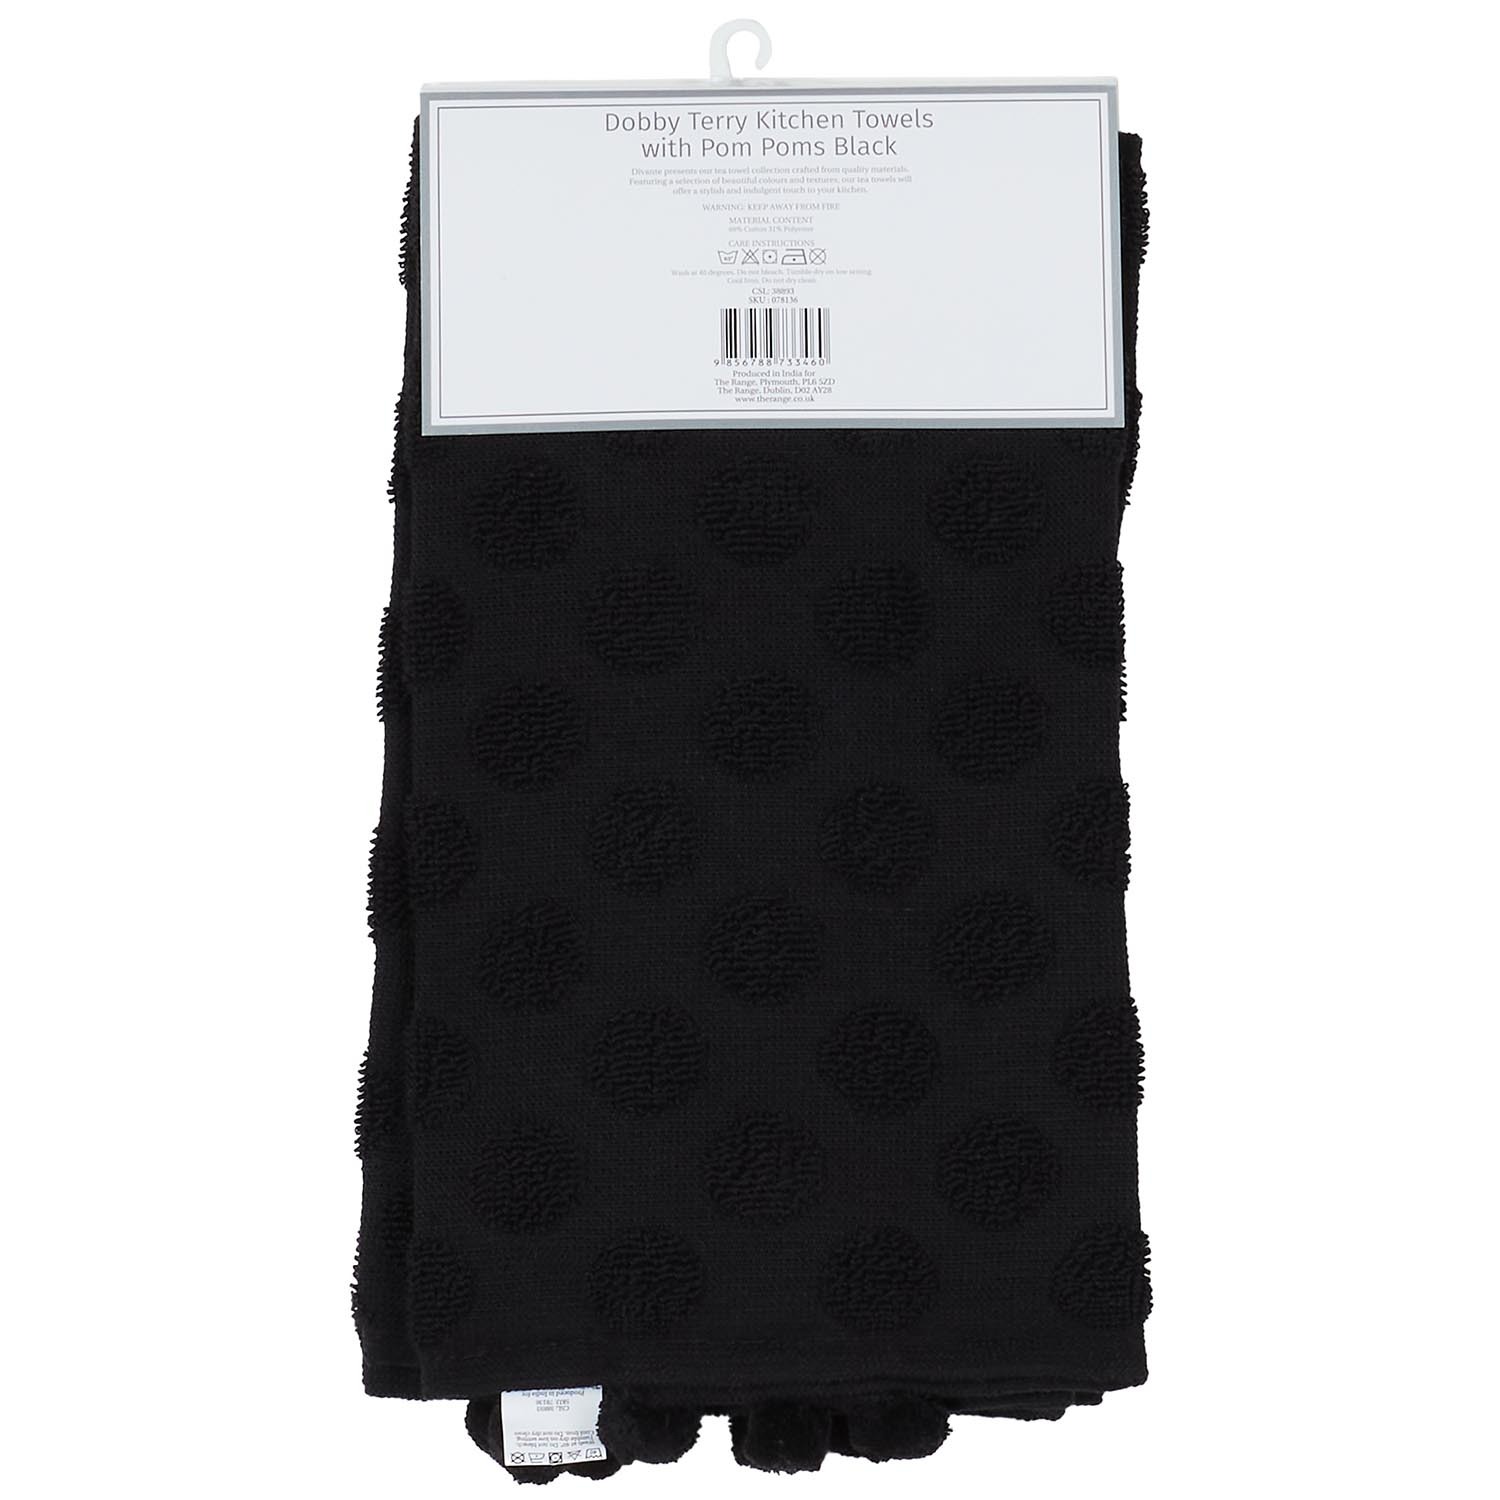 Pack of 2 Dobby Terry Kitchen Towels with Pom Poms - Black Image 4